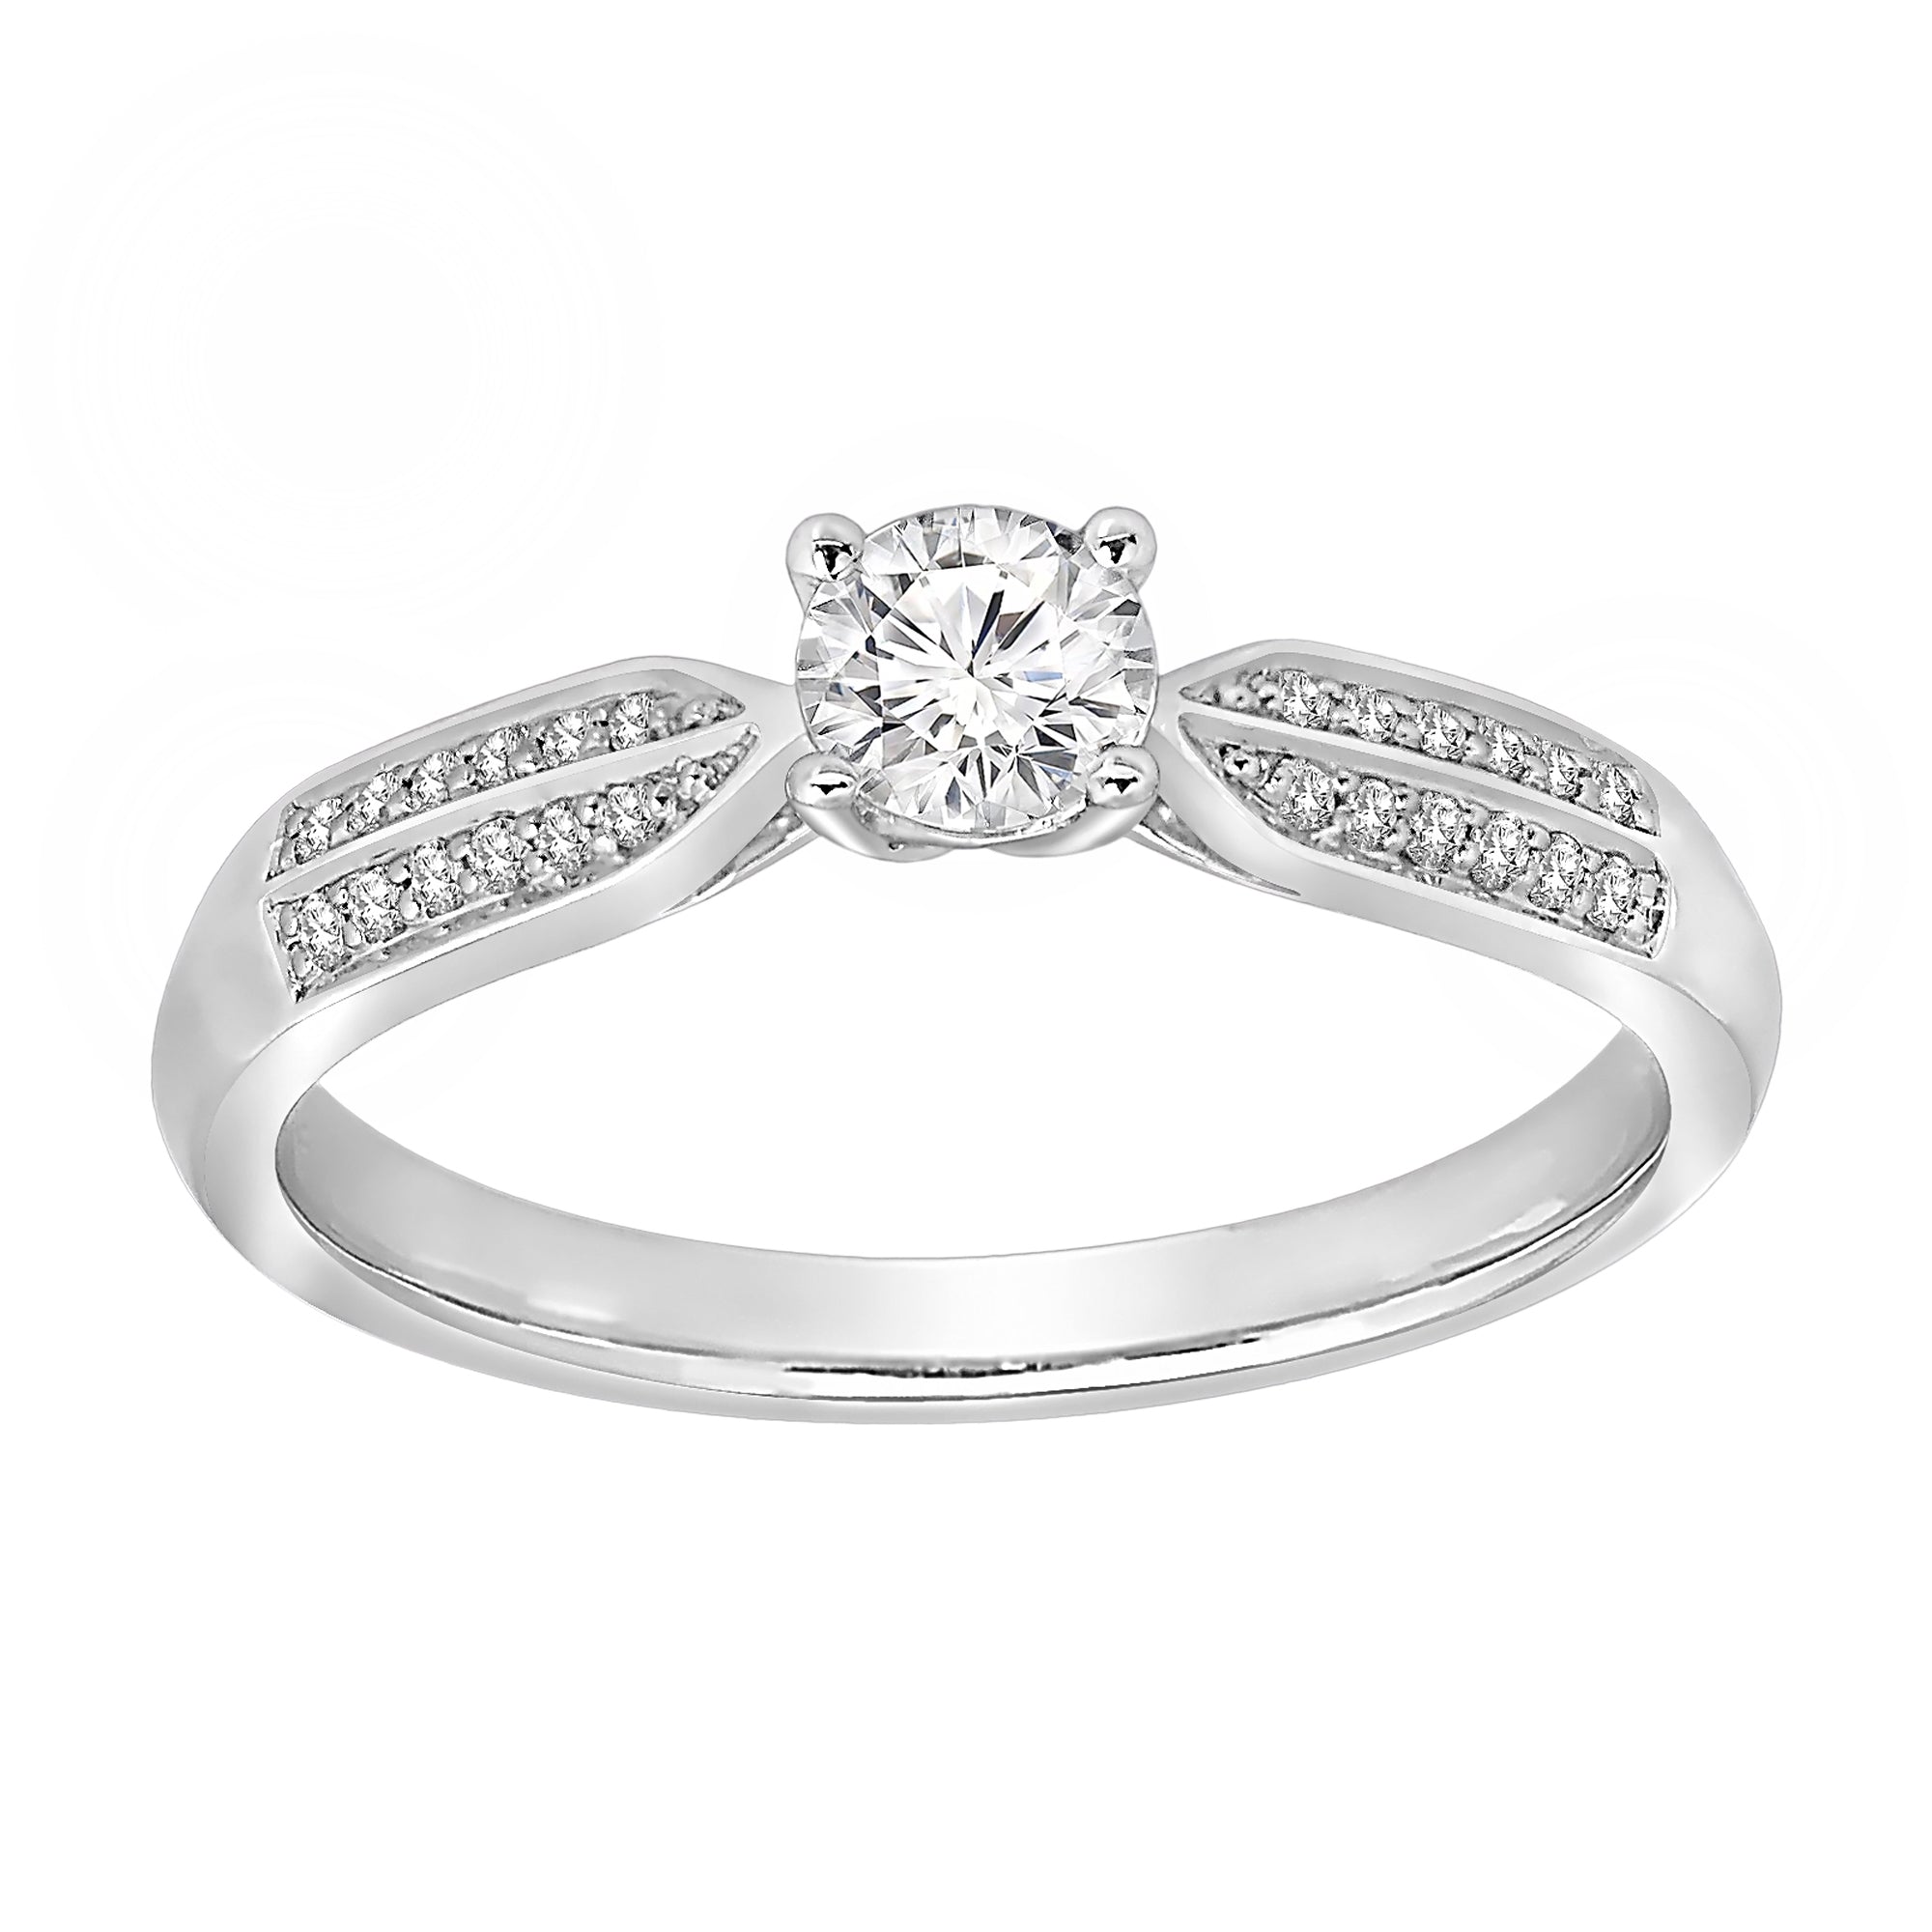 Sterling Silver Cubic Zirconia 0.50ct Ring - AK1019 - Hallmark Jewellers Formby & The Jewellers Bench Widnes